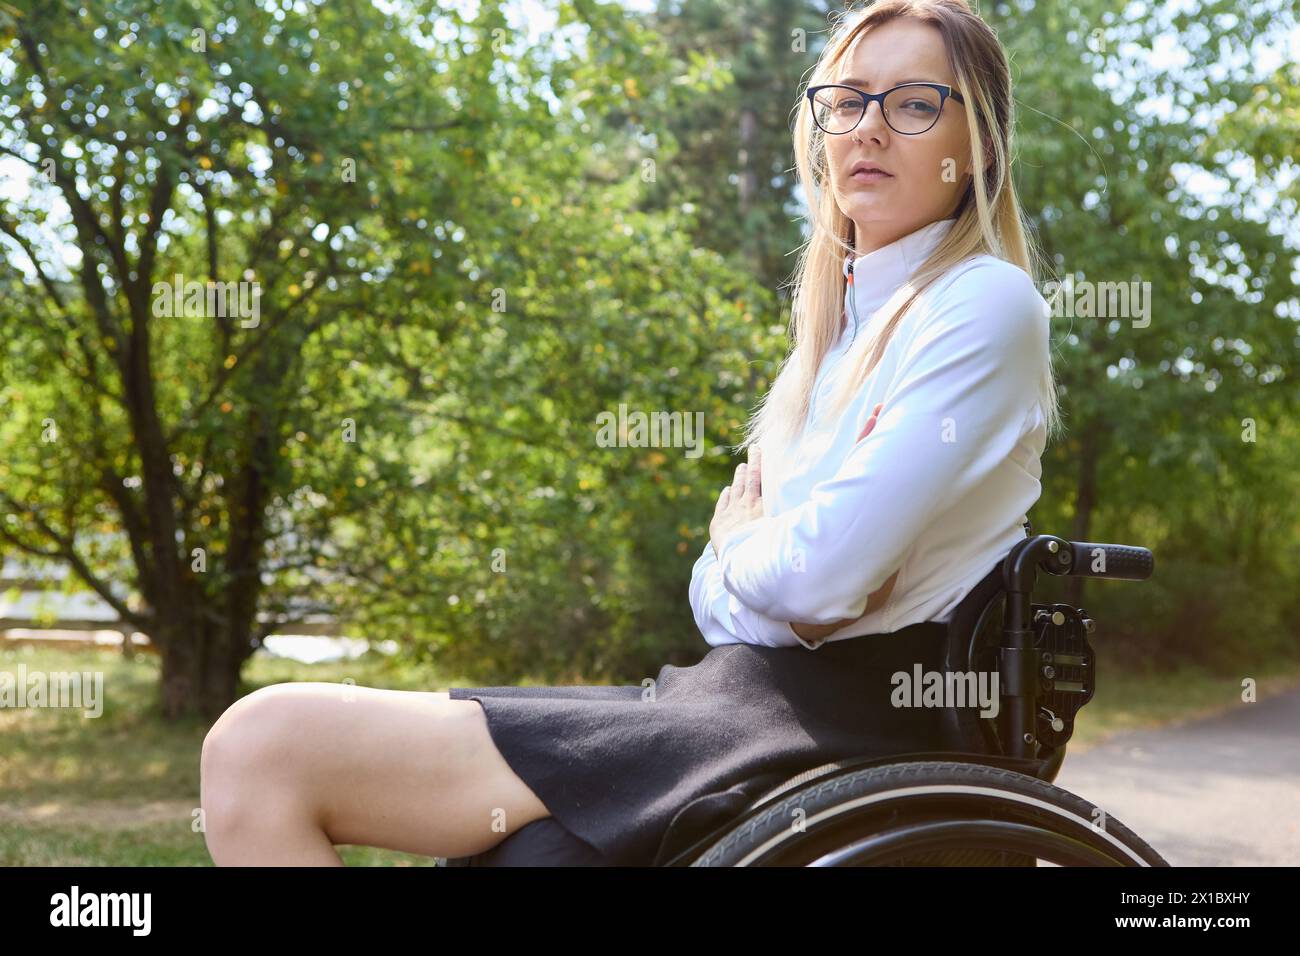 A confident woman who uses a wheelchair is portrayed enjoying a sunny day outdoors, promoting inclusivity and empowerment. Stock Photo